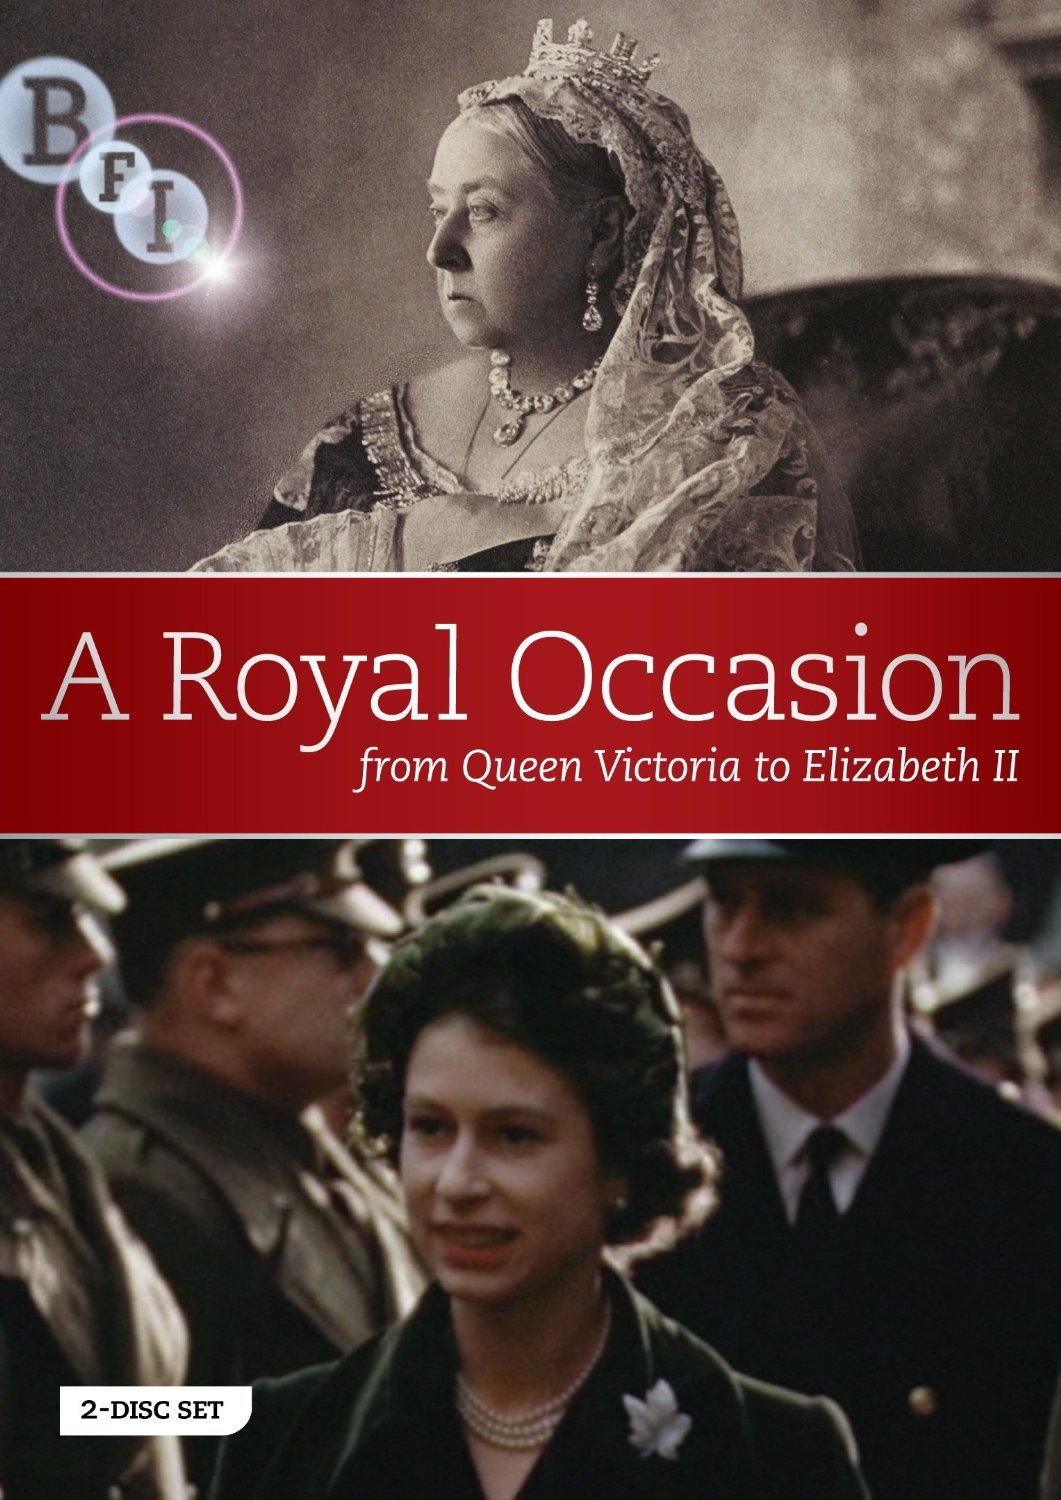 A Royal Occasion: from Queen Victoria to Elizabeth II [DVD]